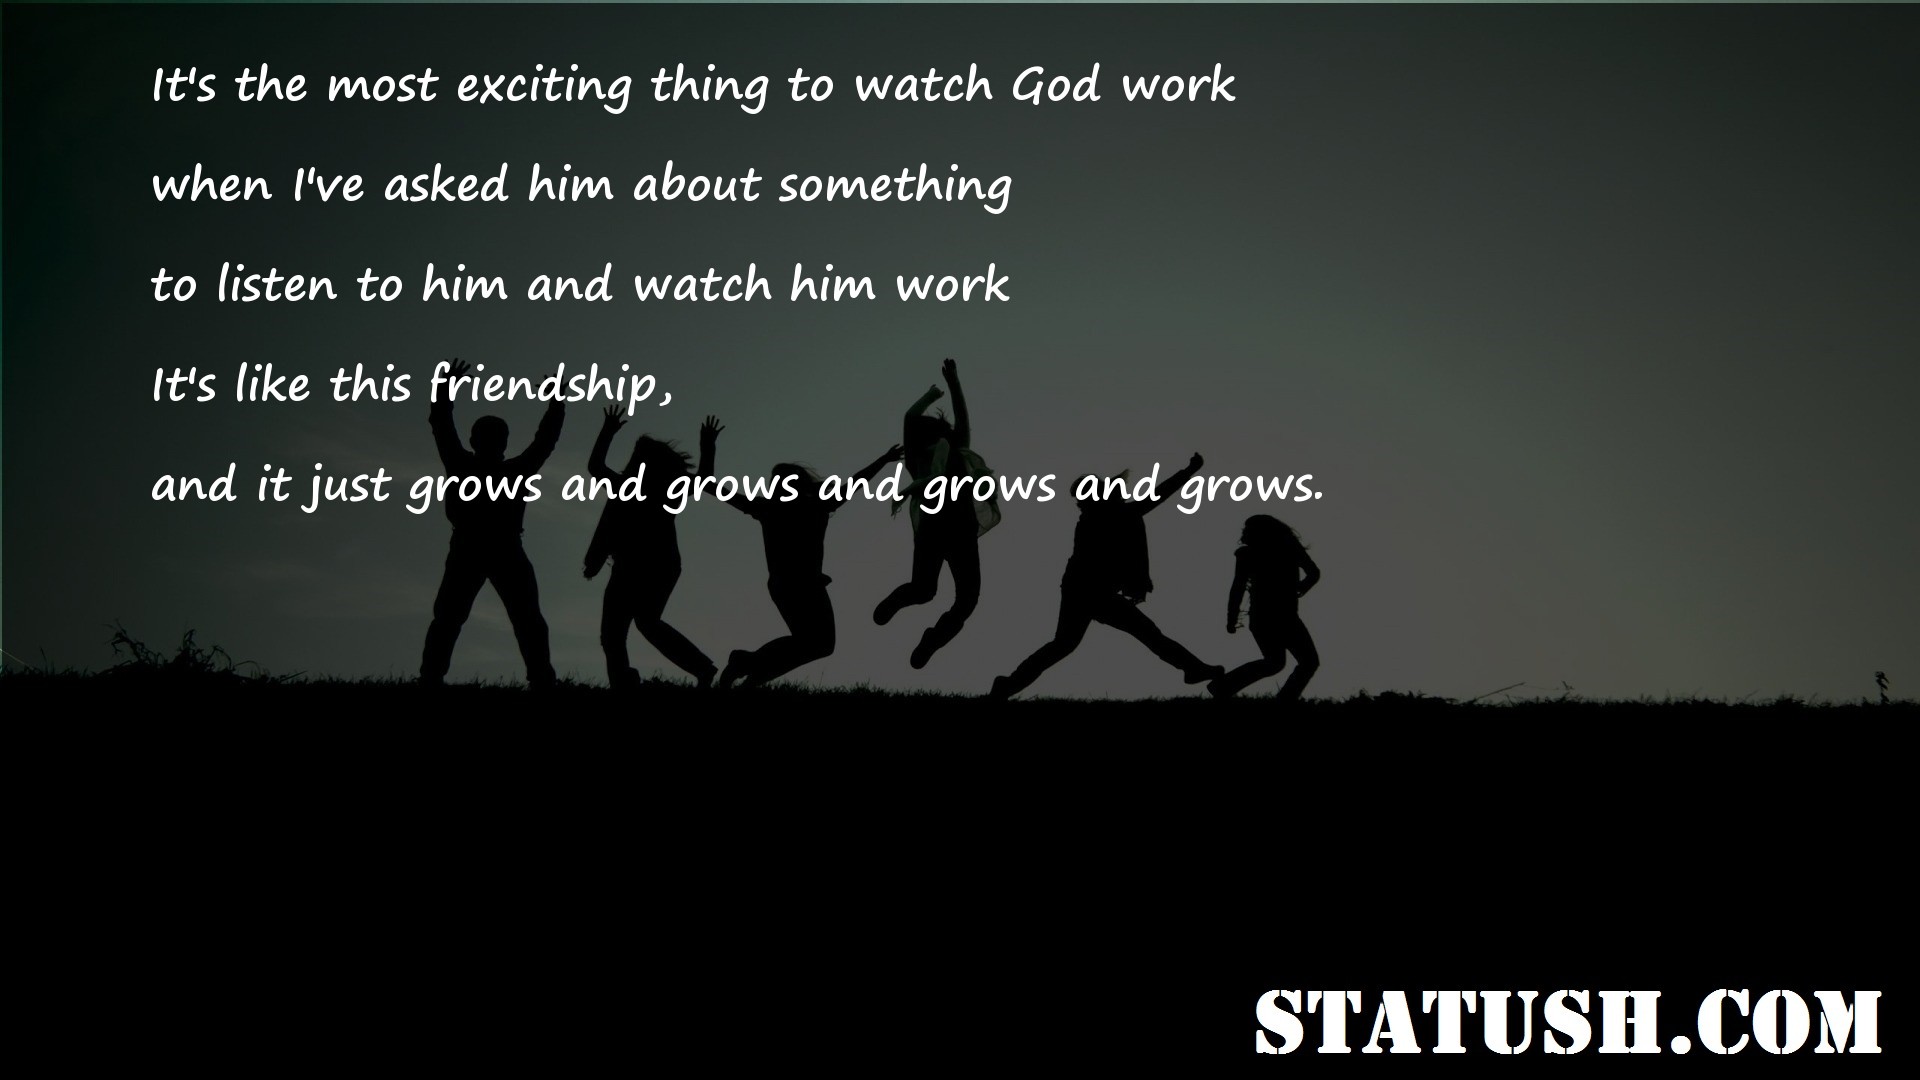 Its the most exciting thing to watch God work - Friendship Quotes at statush.com